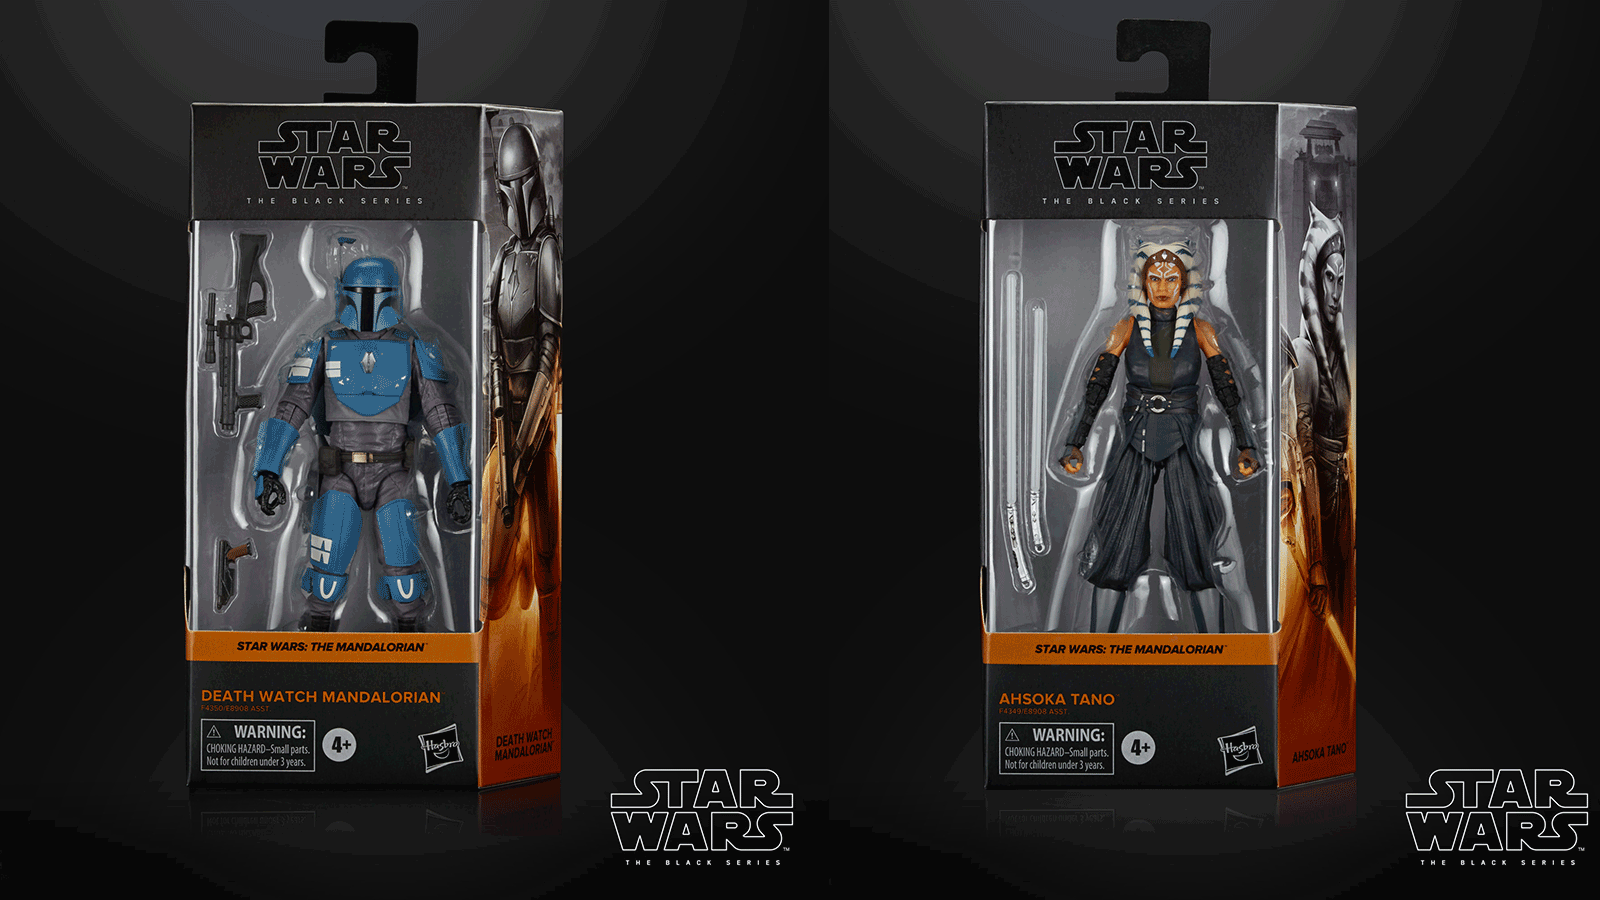 Press Release: First Look At The Black Series 6-Inch Ahsoka Tano and a Death Watch Mandalorian Figures